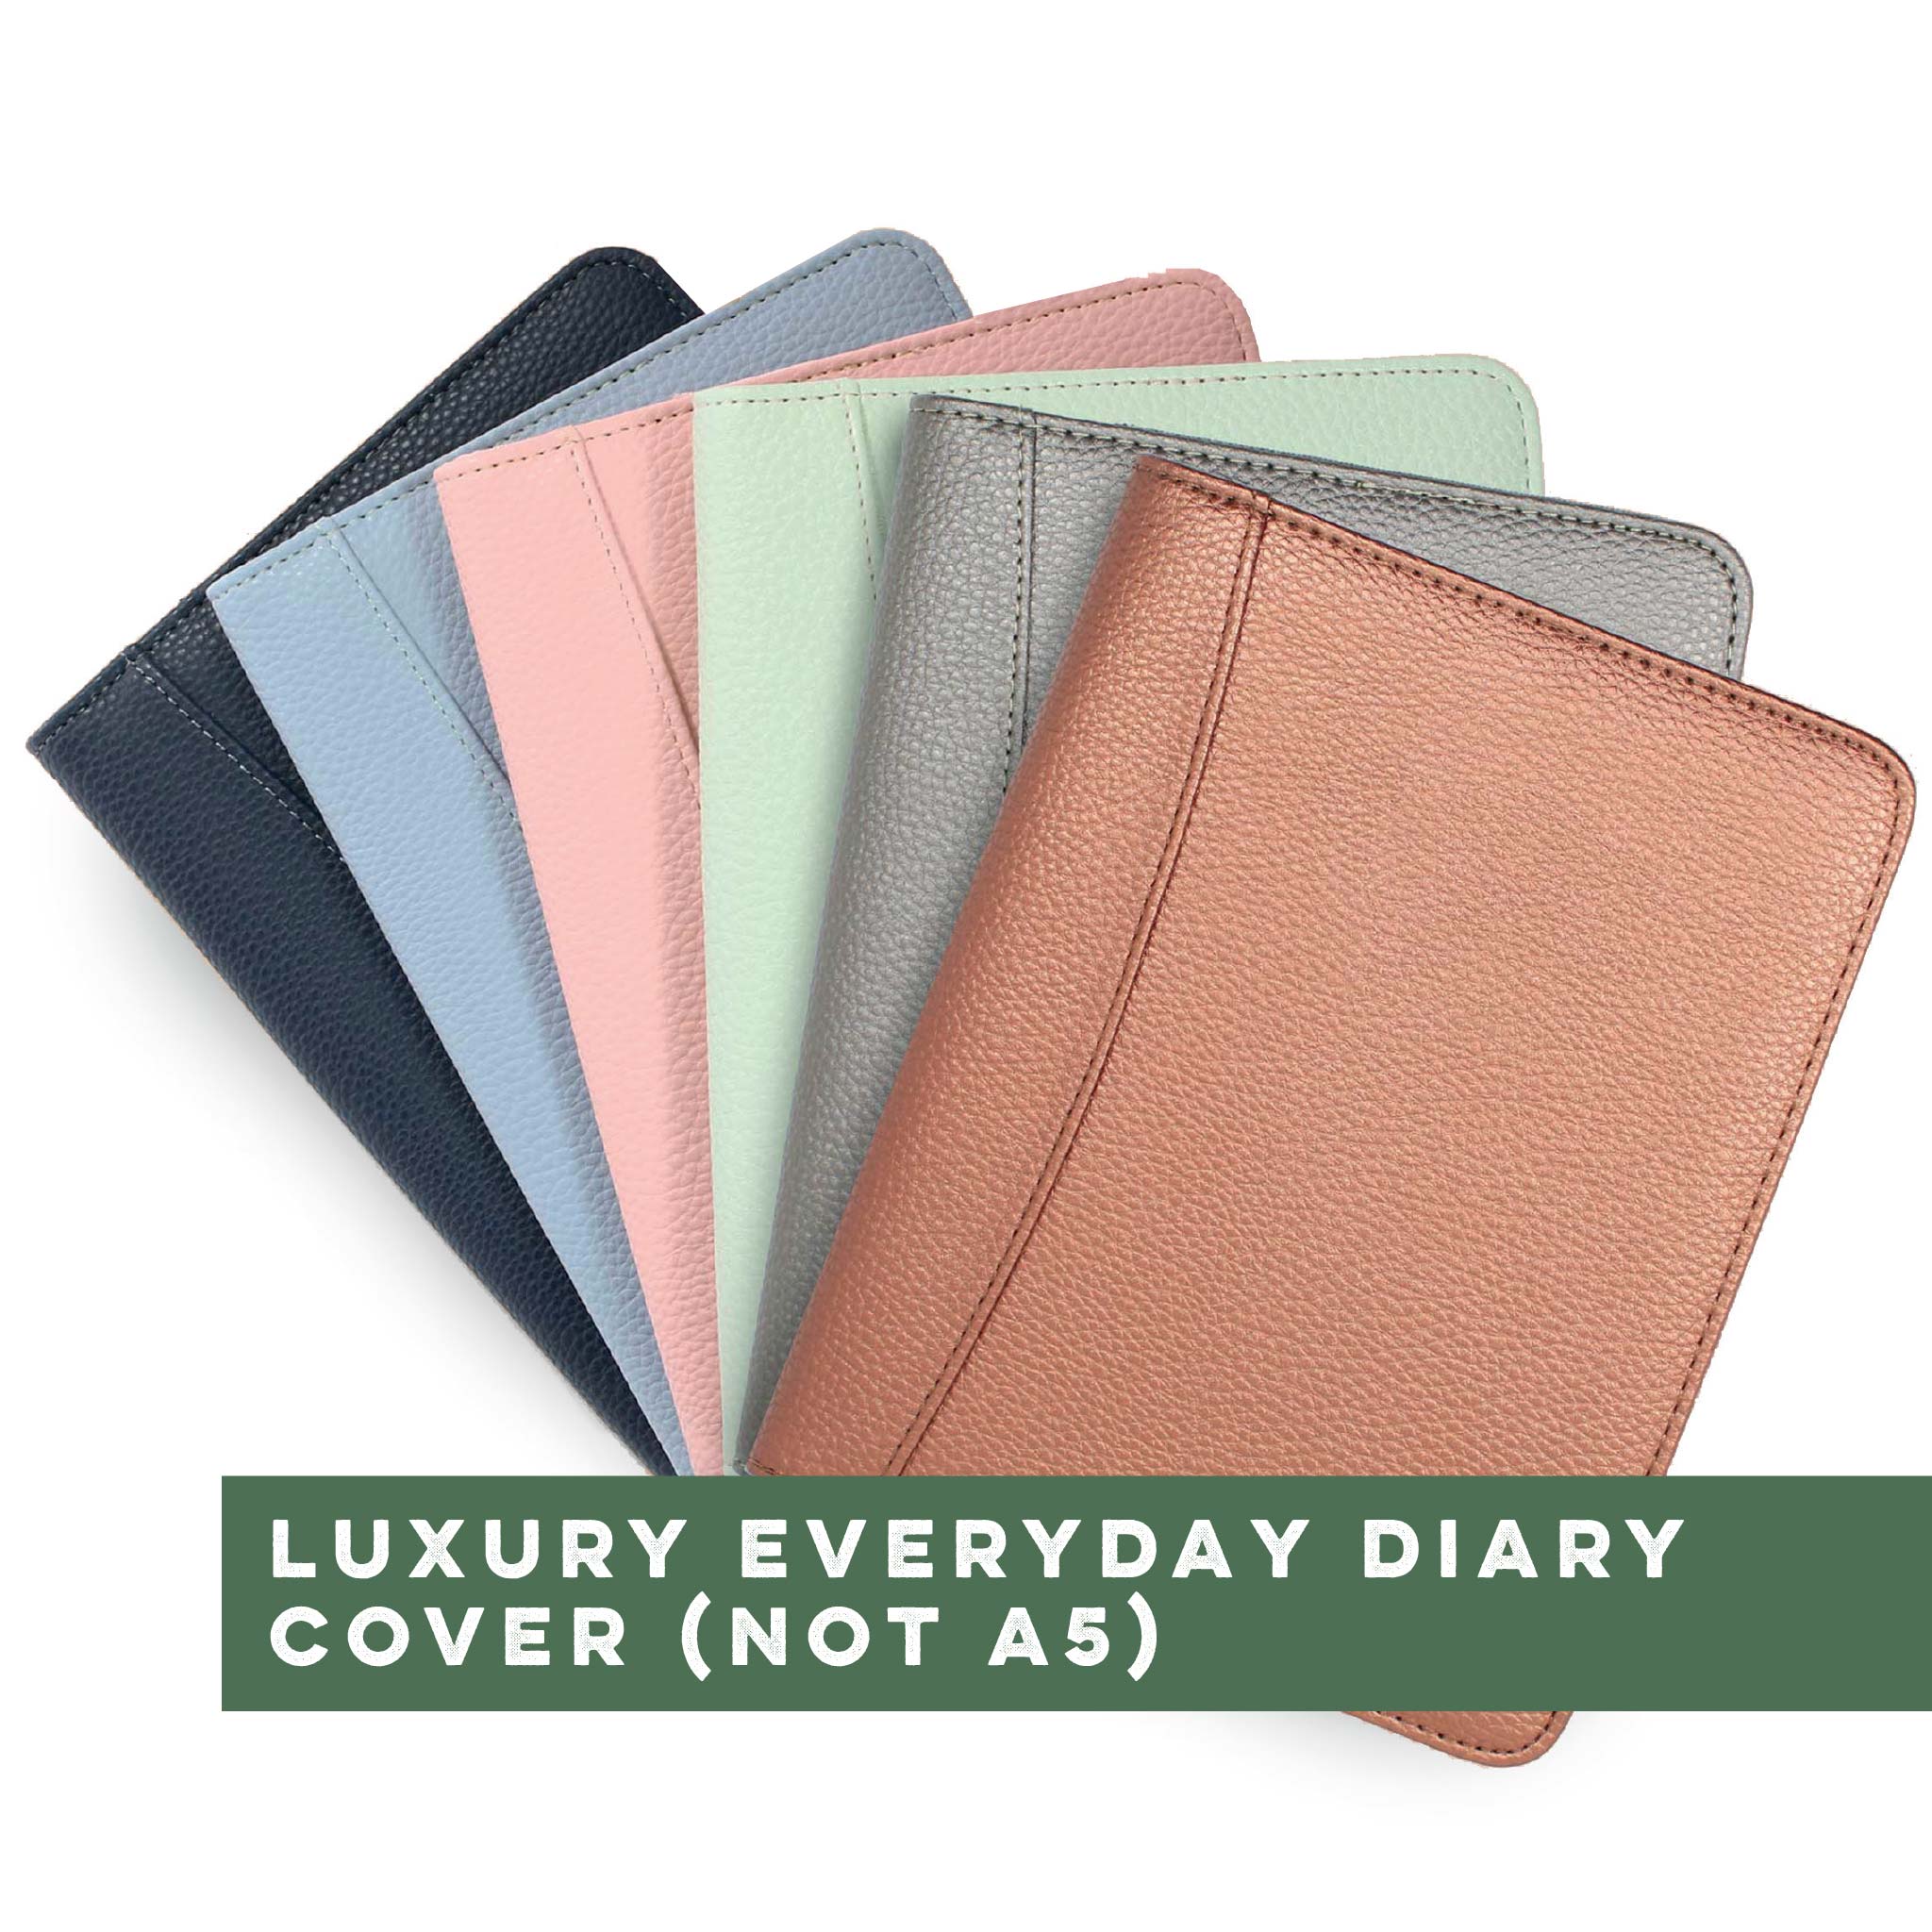 Luxury Everyday Diary Cover | Full-Zip Cover with Internal Pocket ...